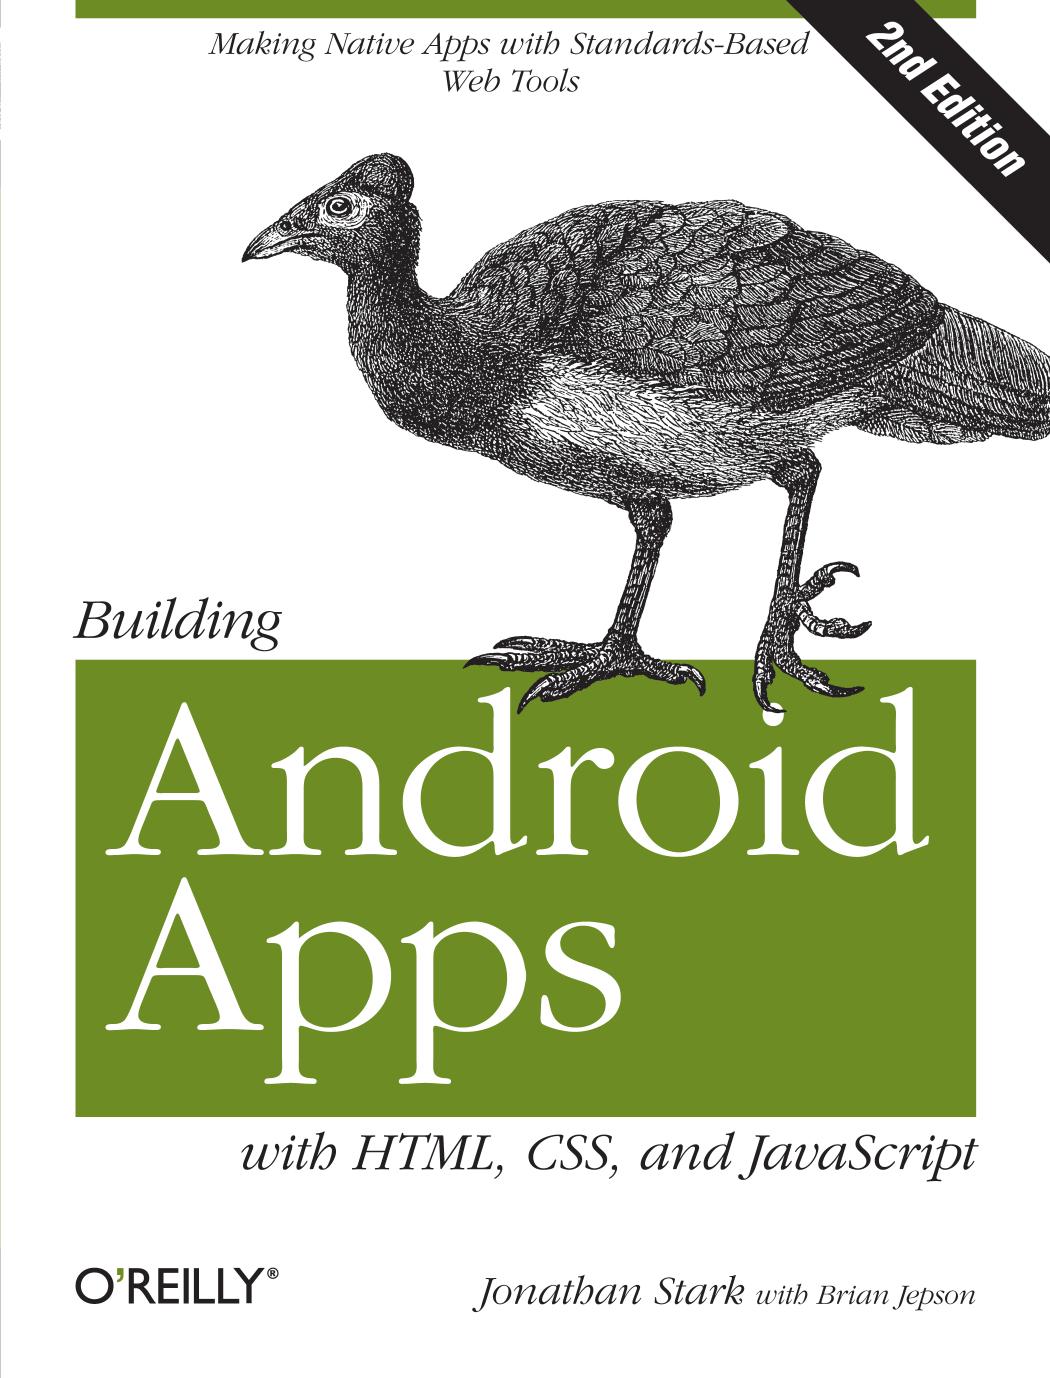 Building Android Apps with HTML, CSS, and JavaScript by Jonathan Stark & Brian Jepson